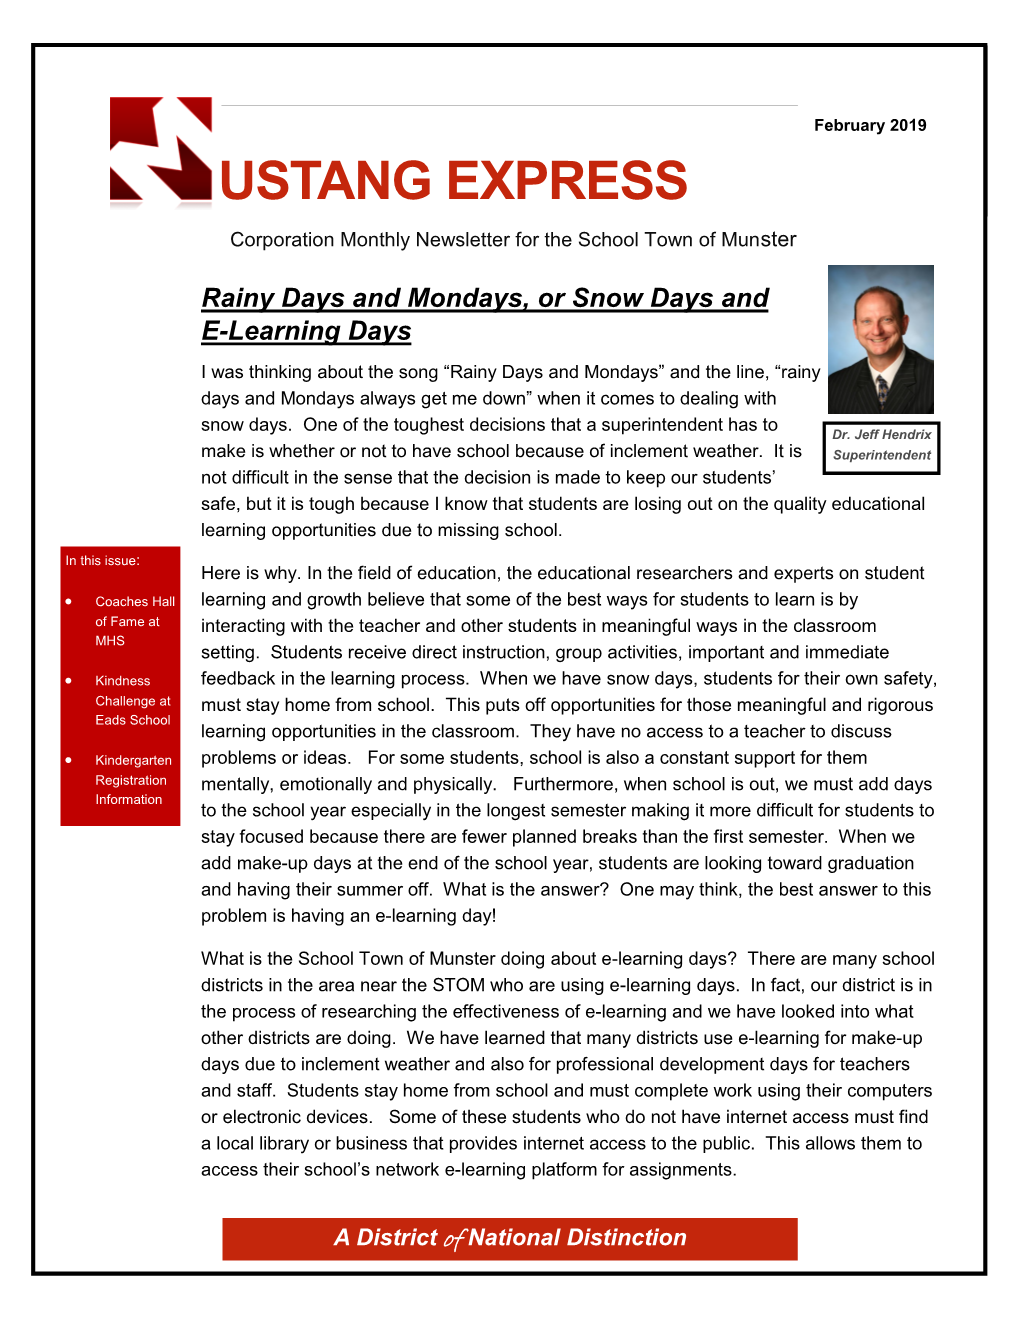 USTANG EXPRESS Corporation Monthly Newsletter for the School Town of Munster